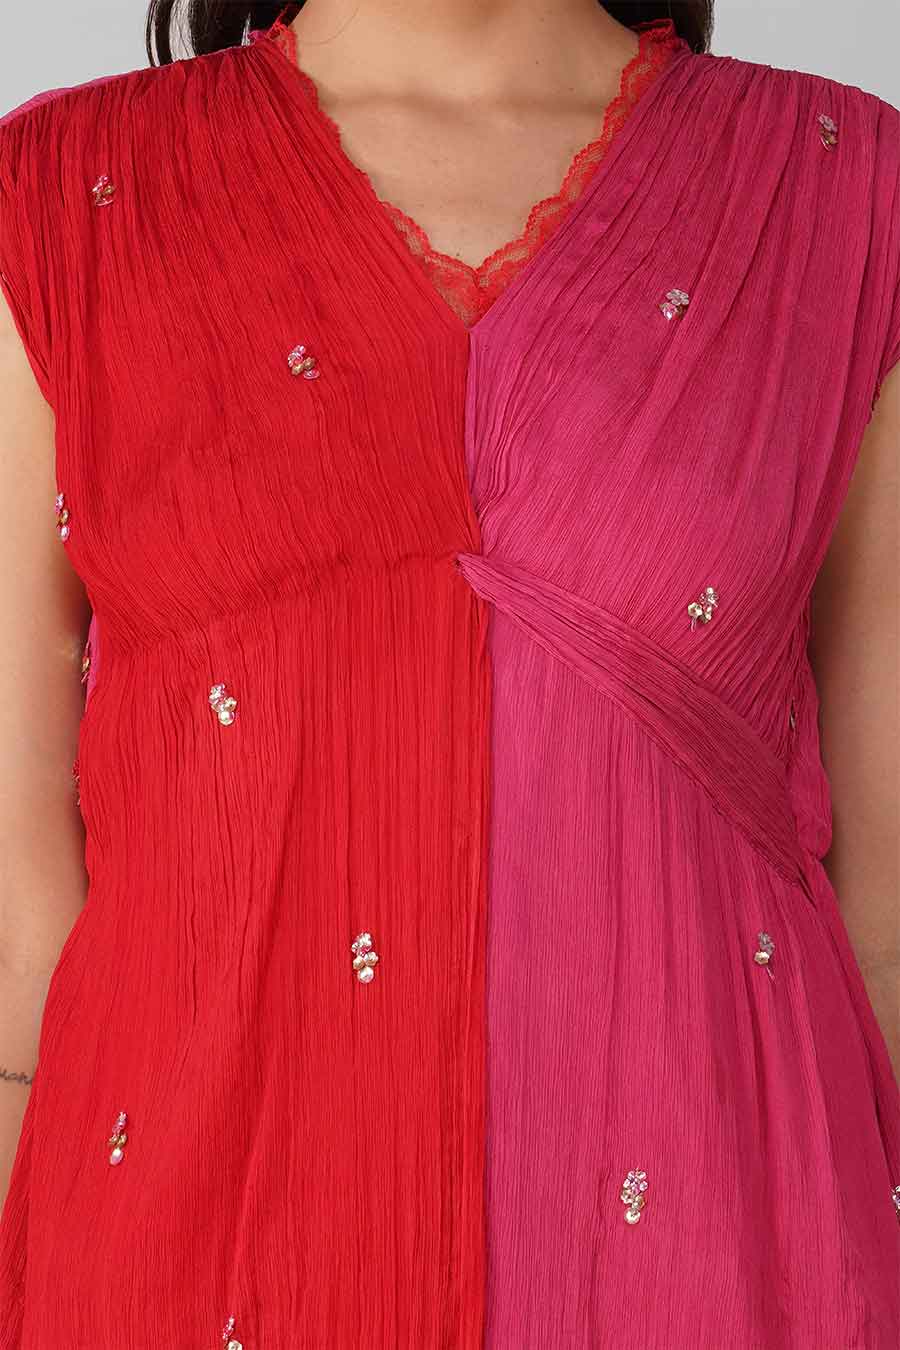 Red-Pink Knotted Dress